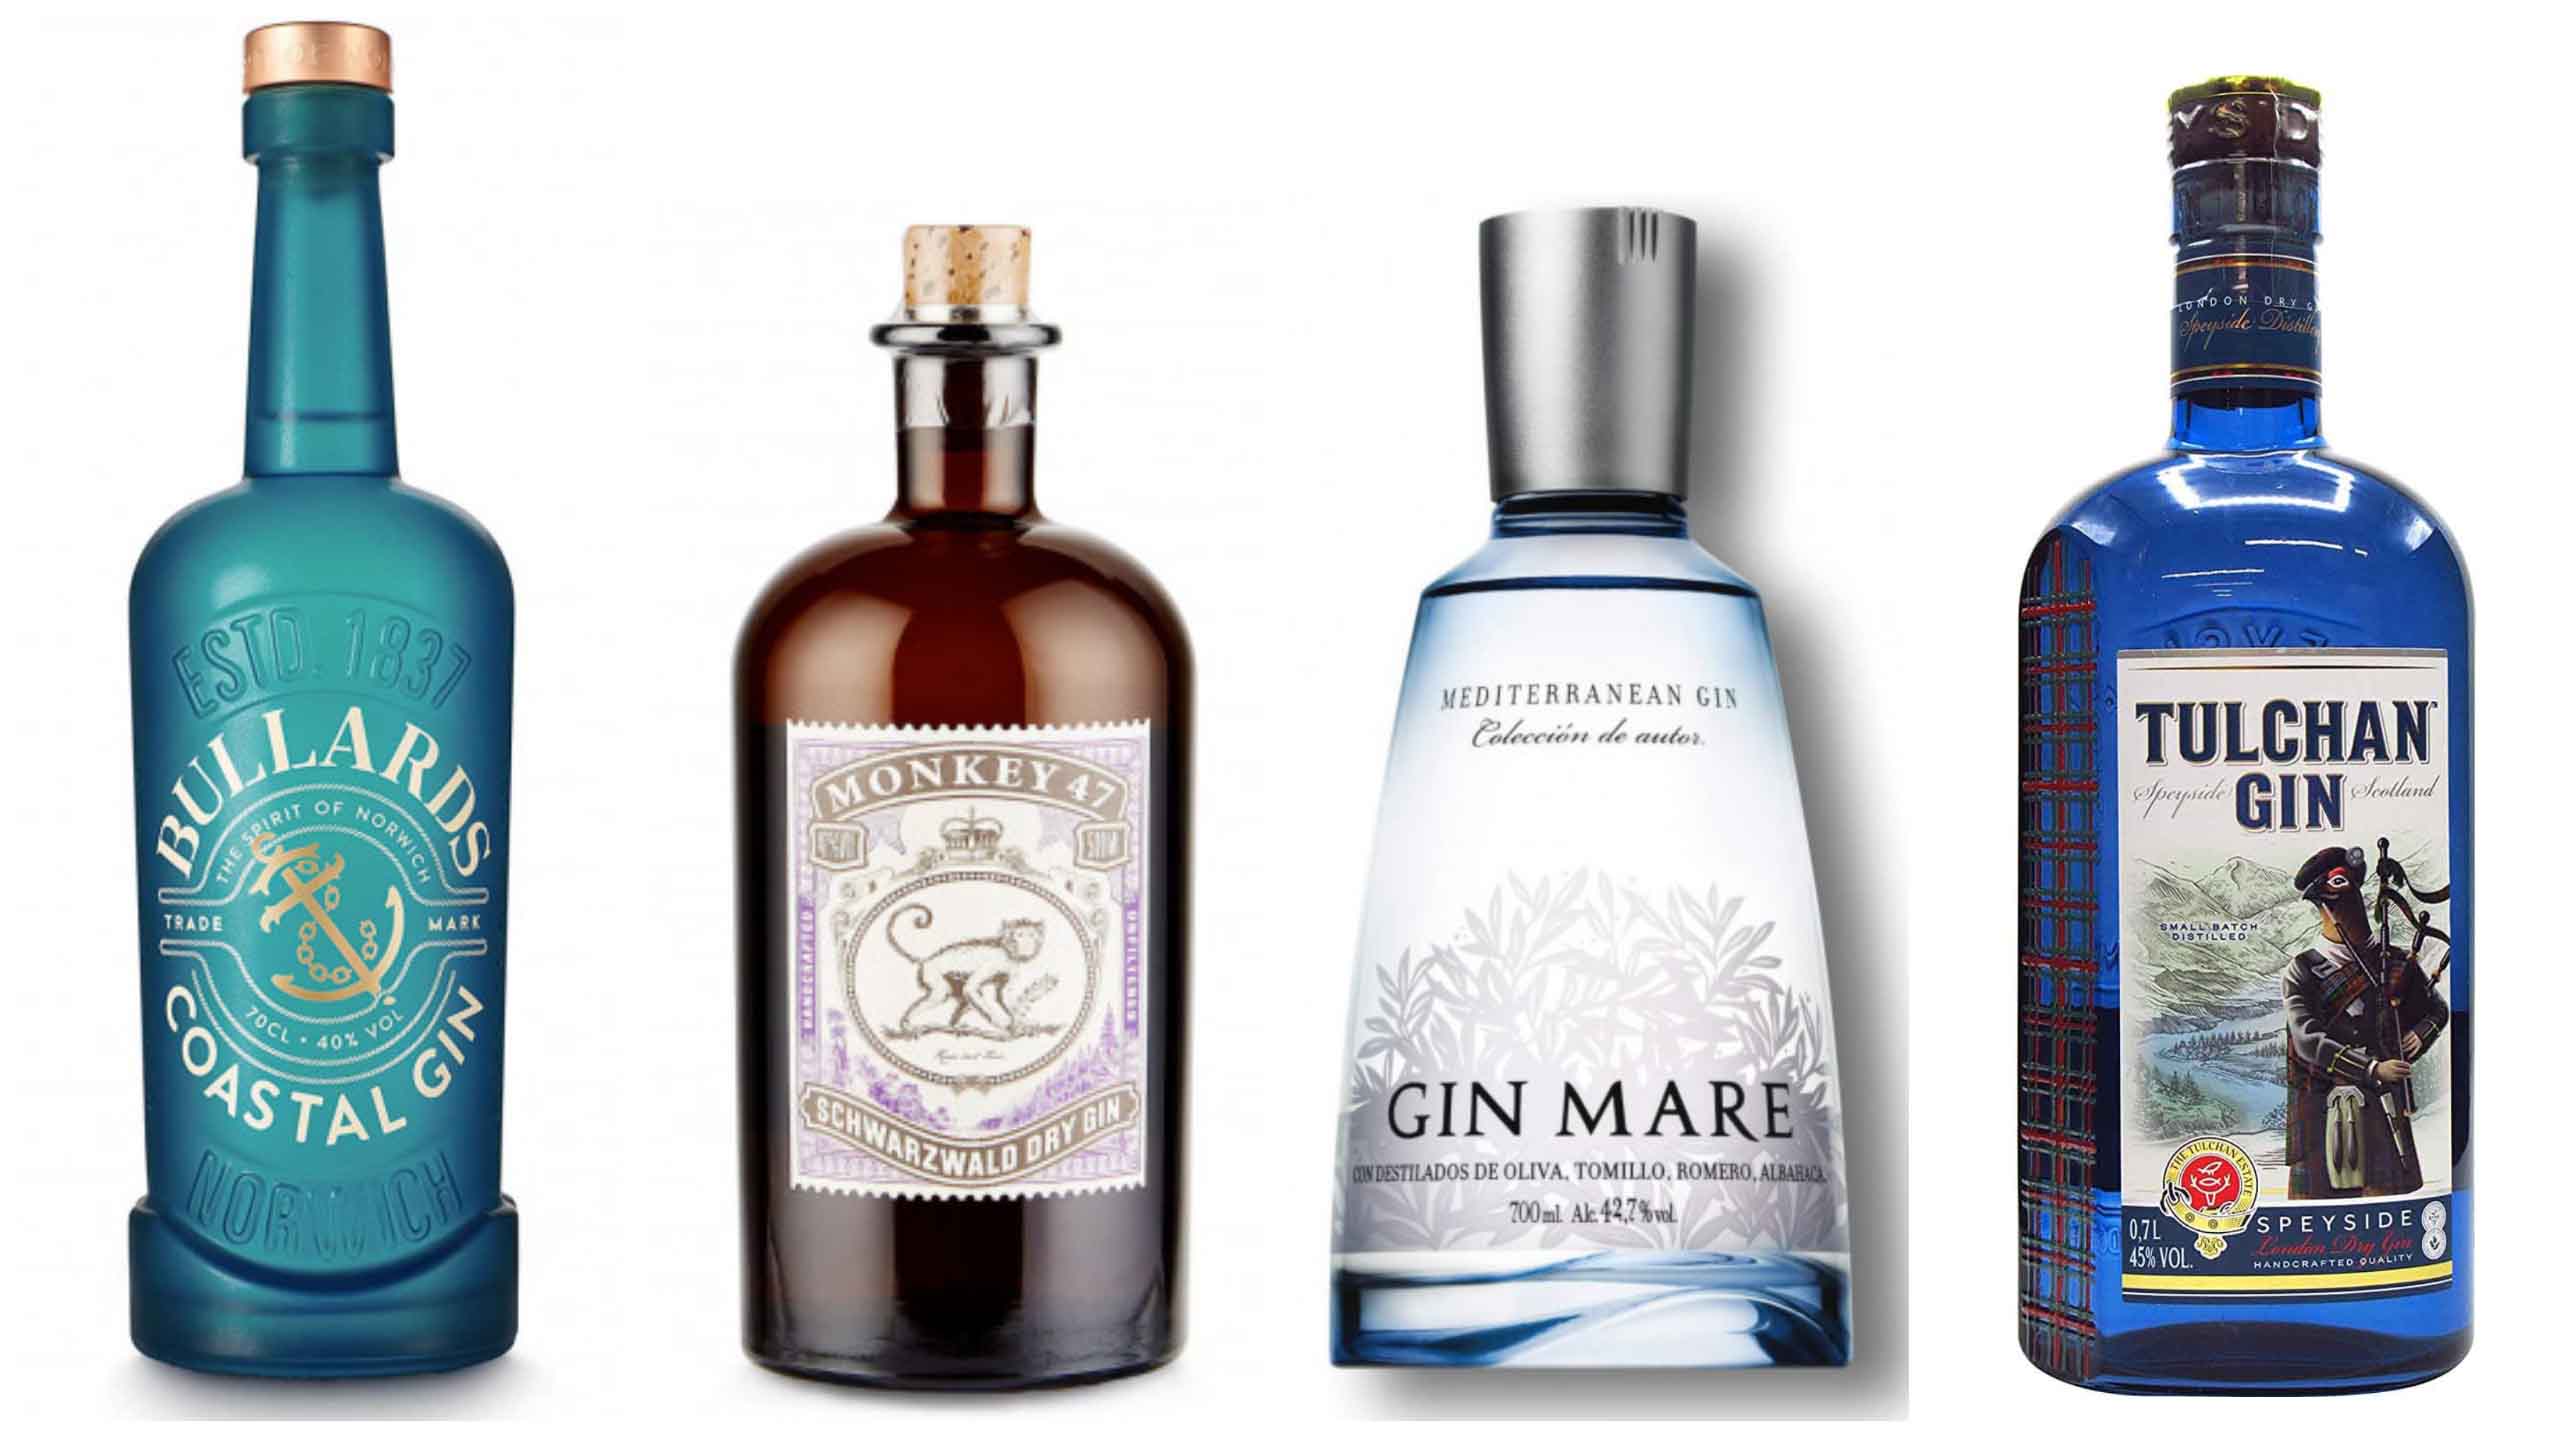 George Hanbury Mod mm The best gins to drink in 2023 - 42 amazing gin brands tested